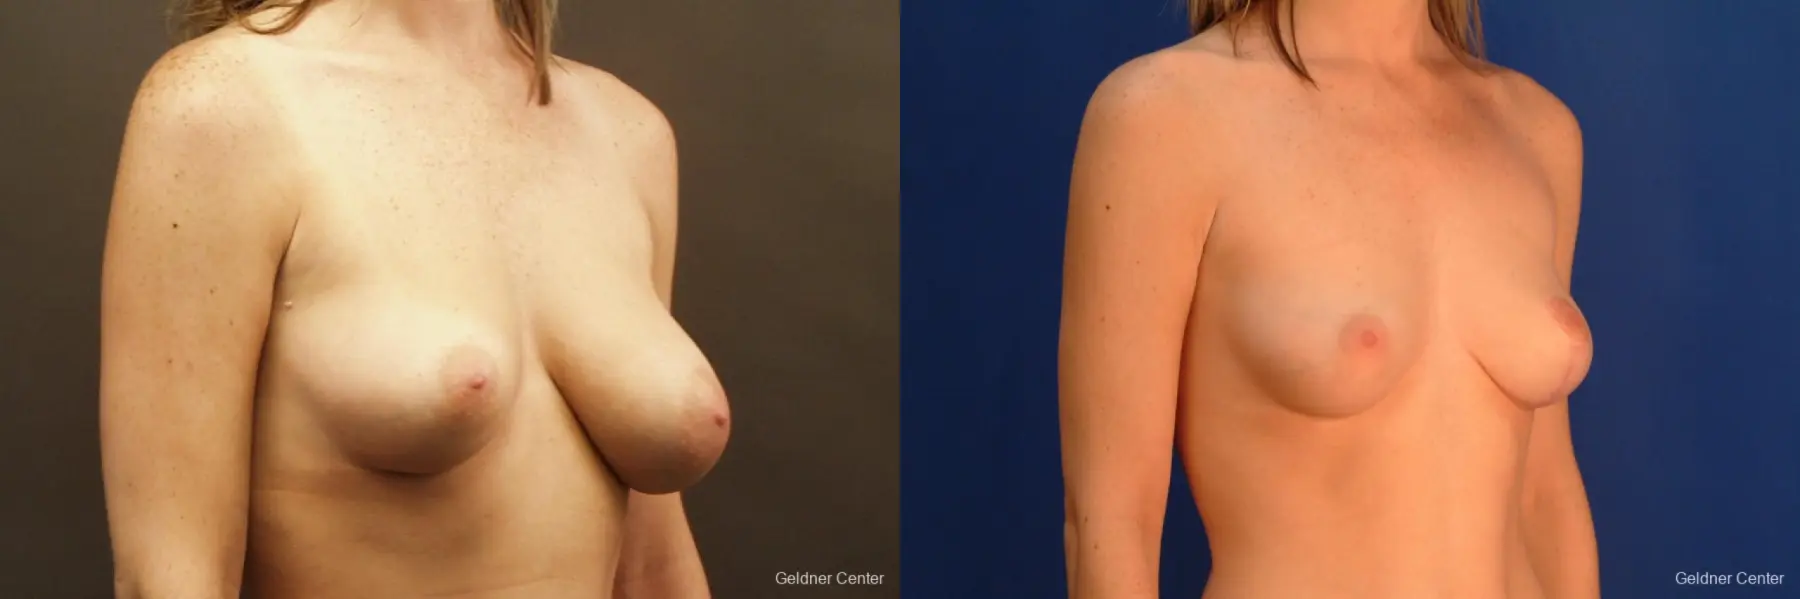 Chicago Breast Lift 2537 - Before and After 3